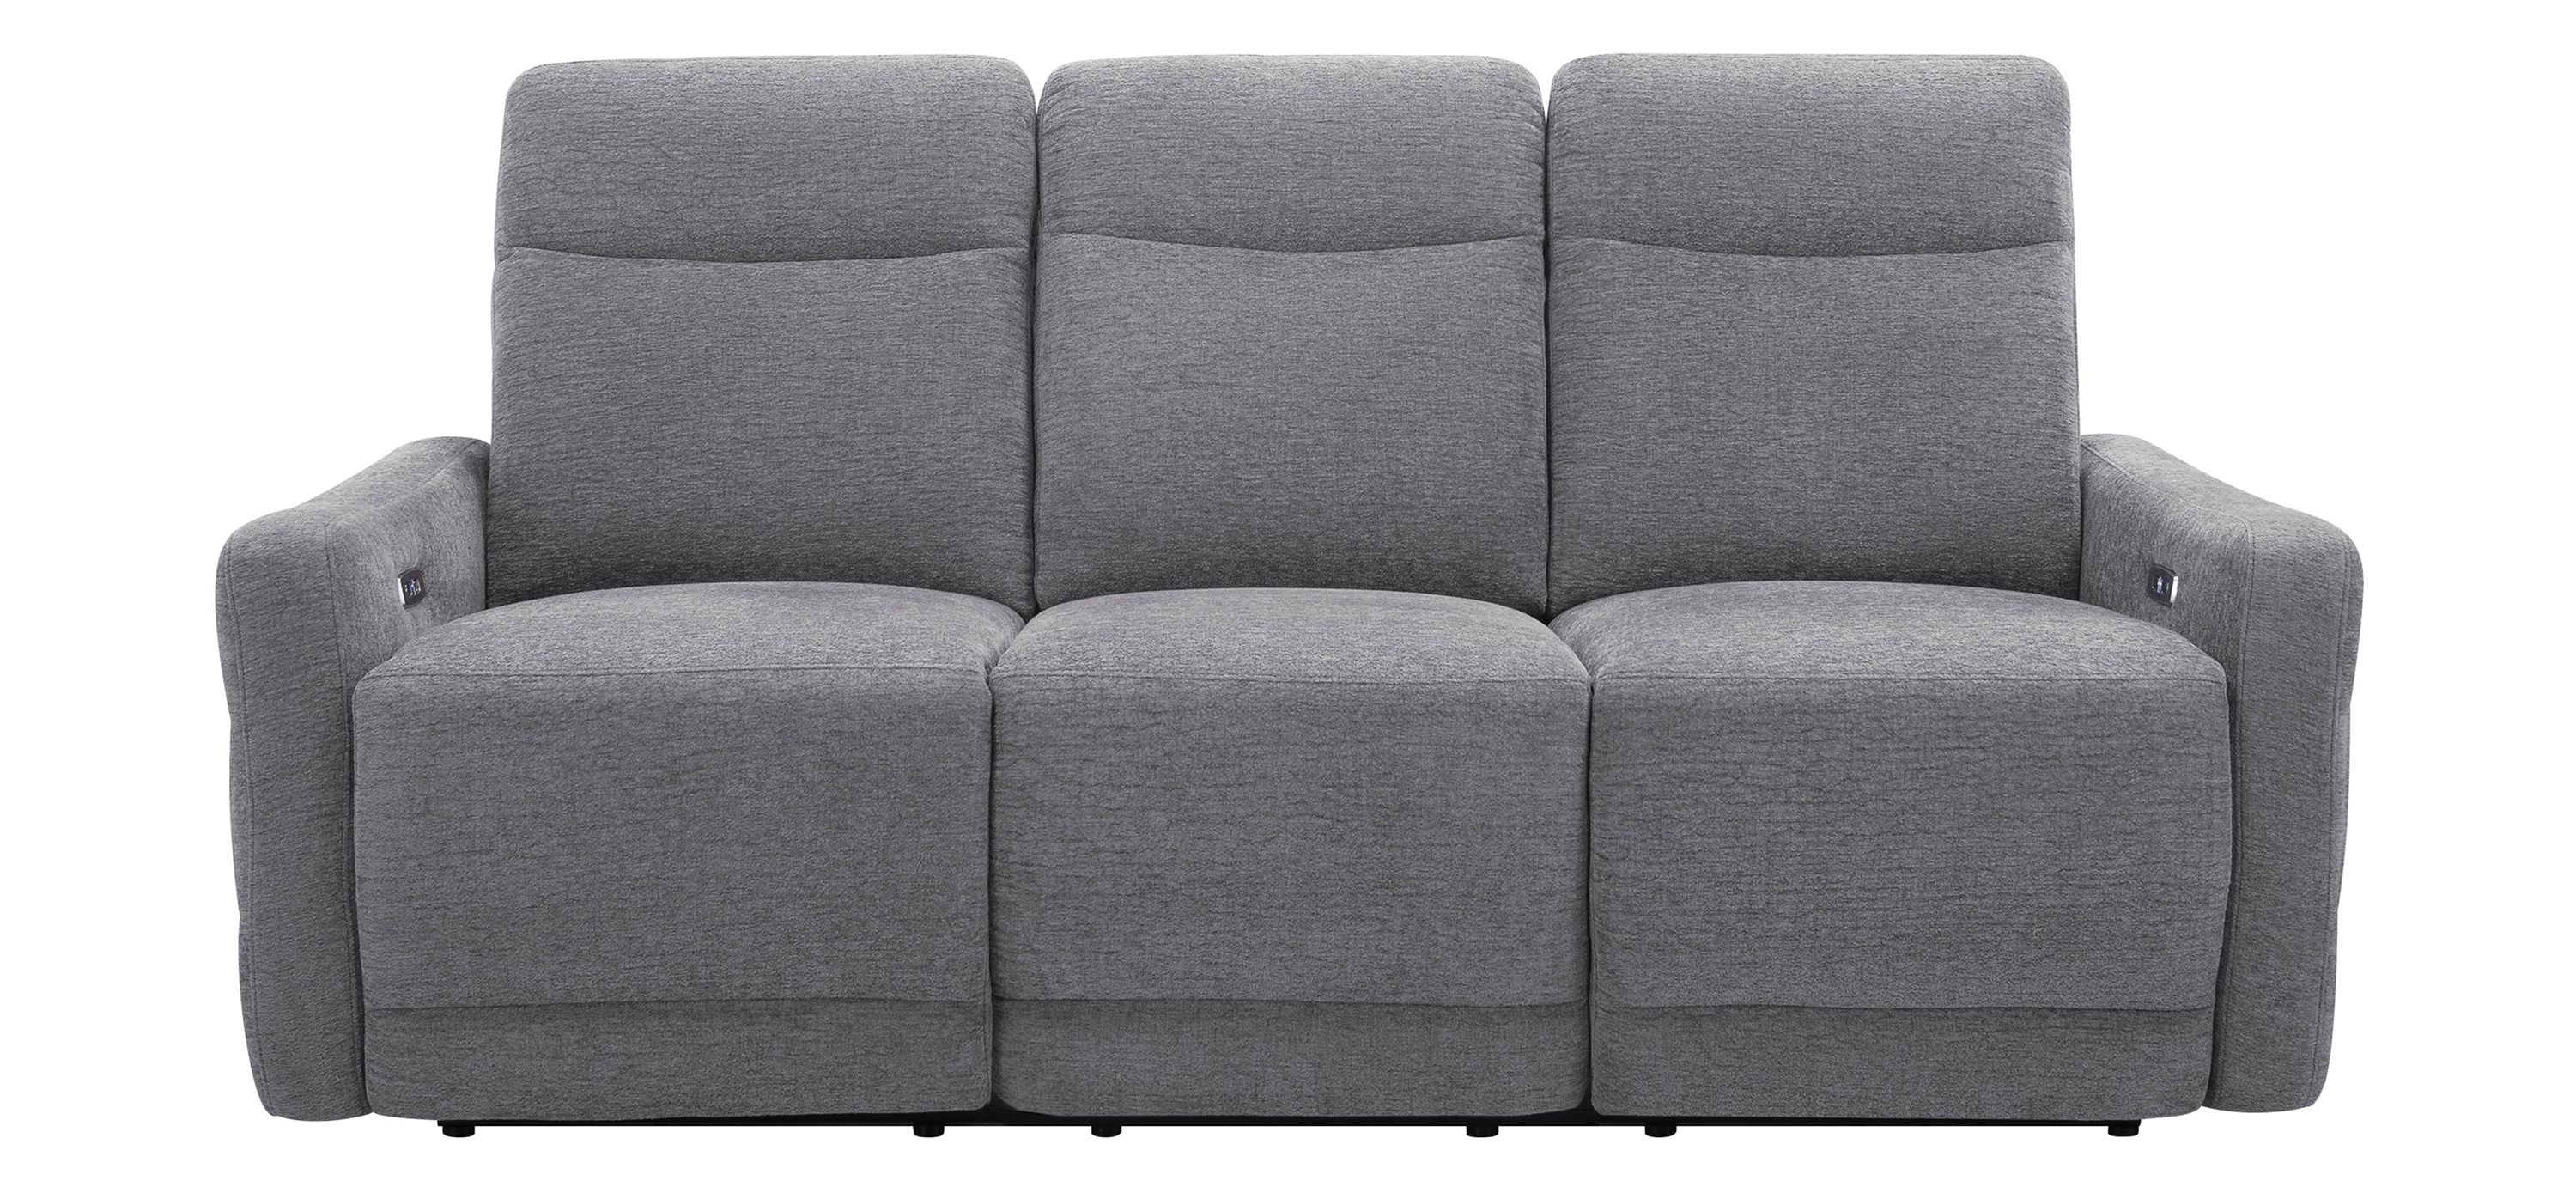 Yardley Chenille Power Sofa with Power Headrest and Lay Flat